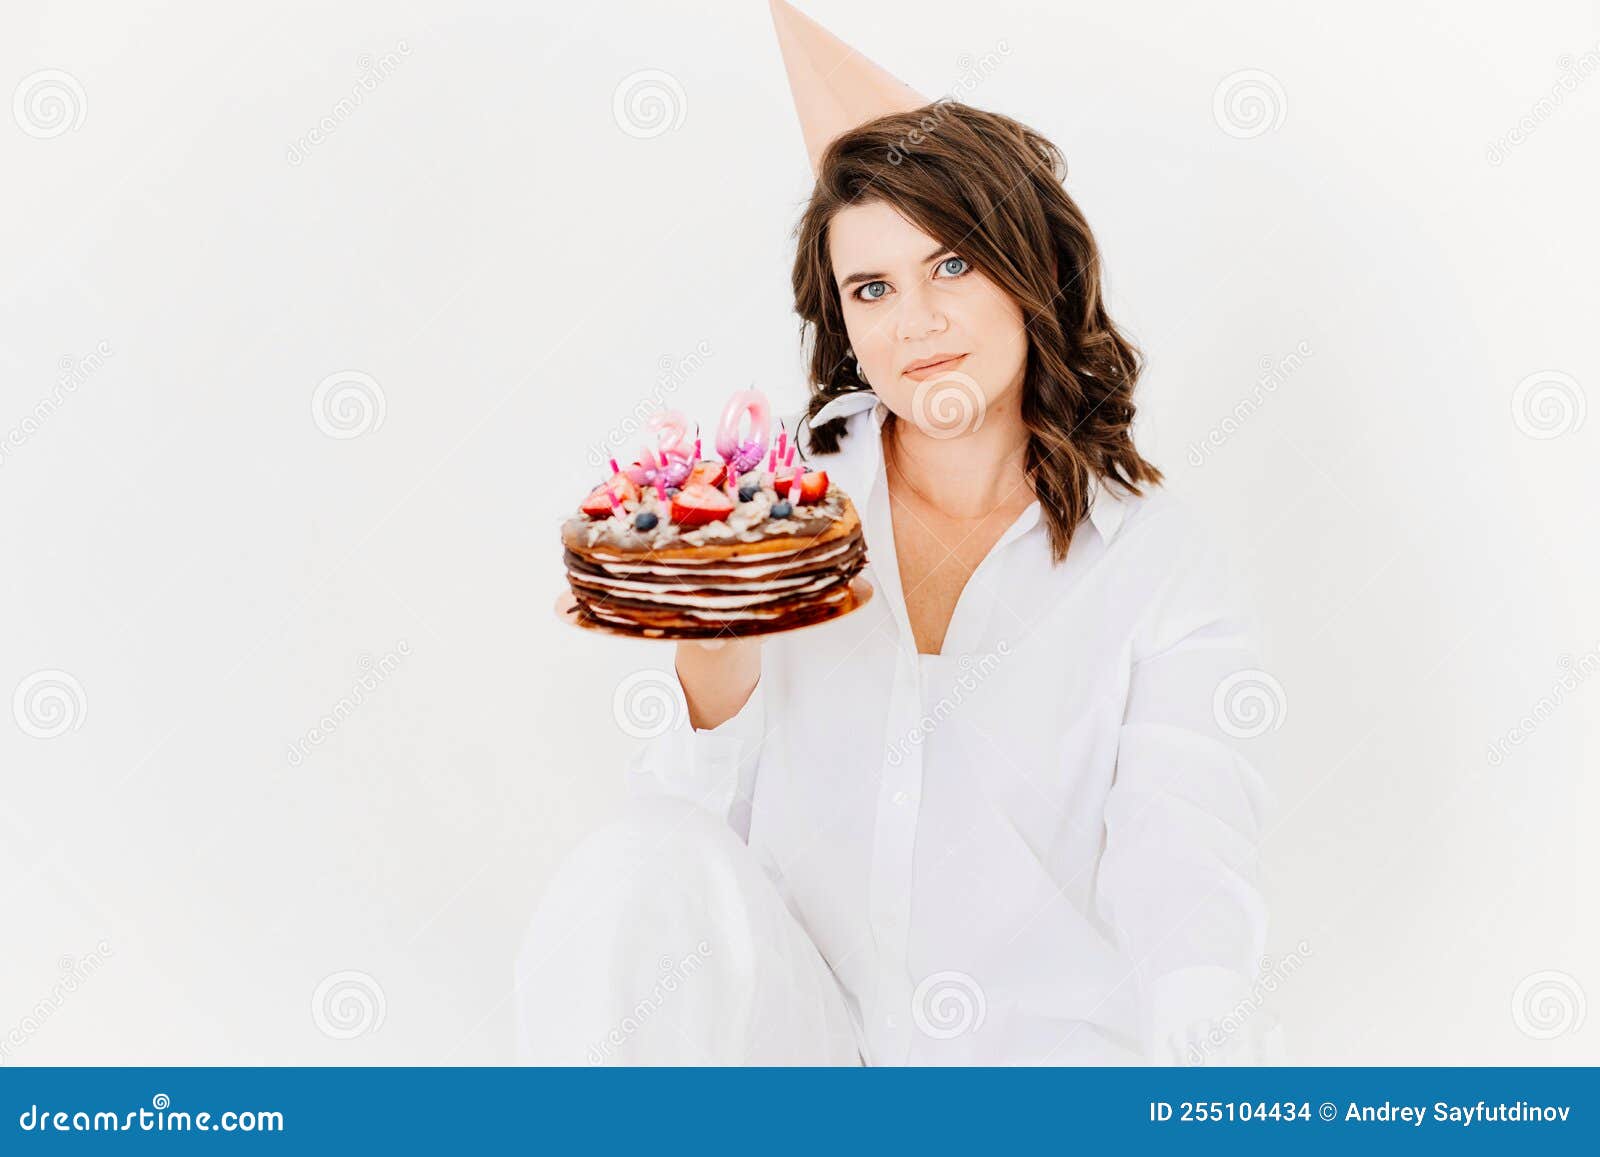 A Happy Lonely Woman with a Birthday Cake with Candles on a White ...